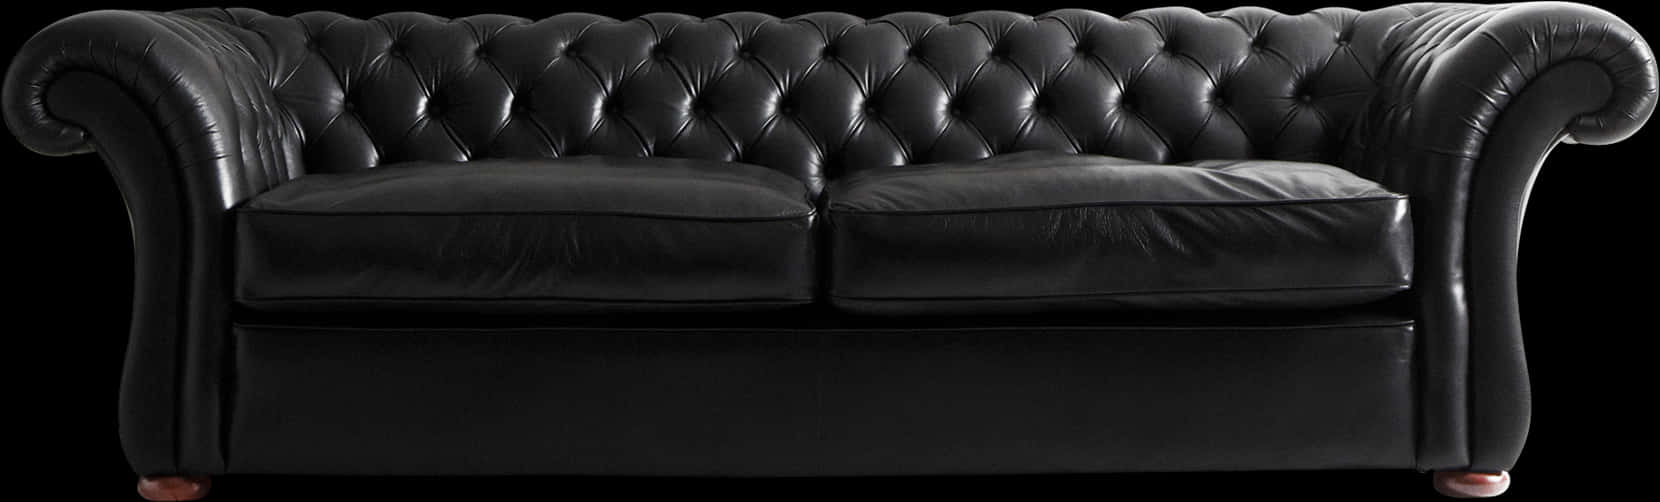 Elegant Black Leather Chesterfield Sofa PNG